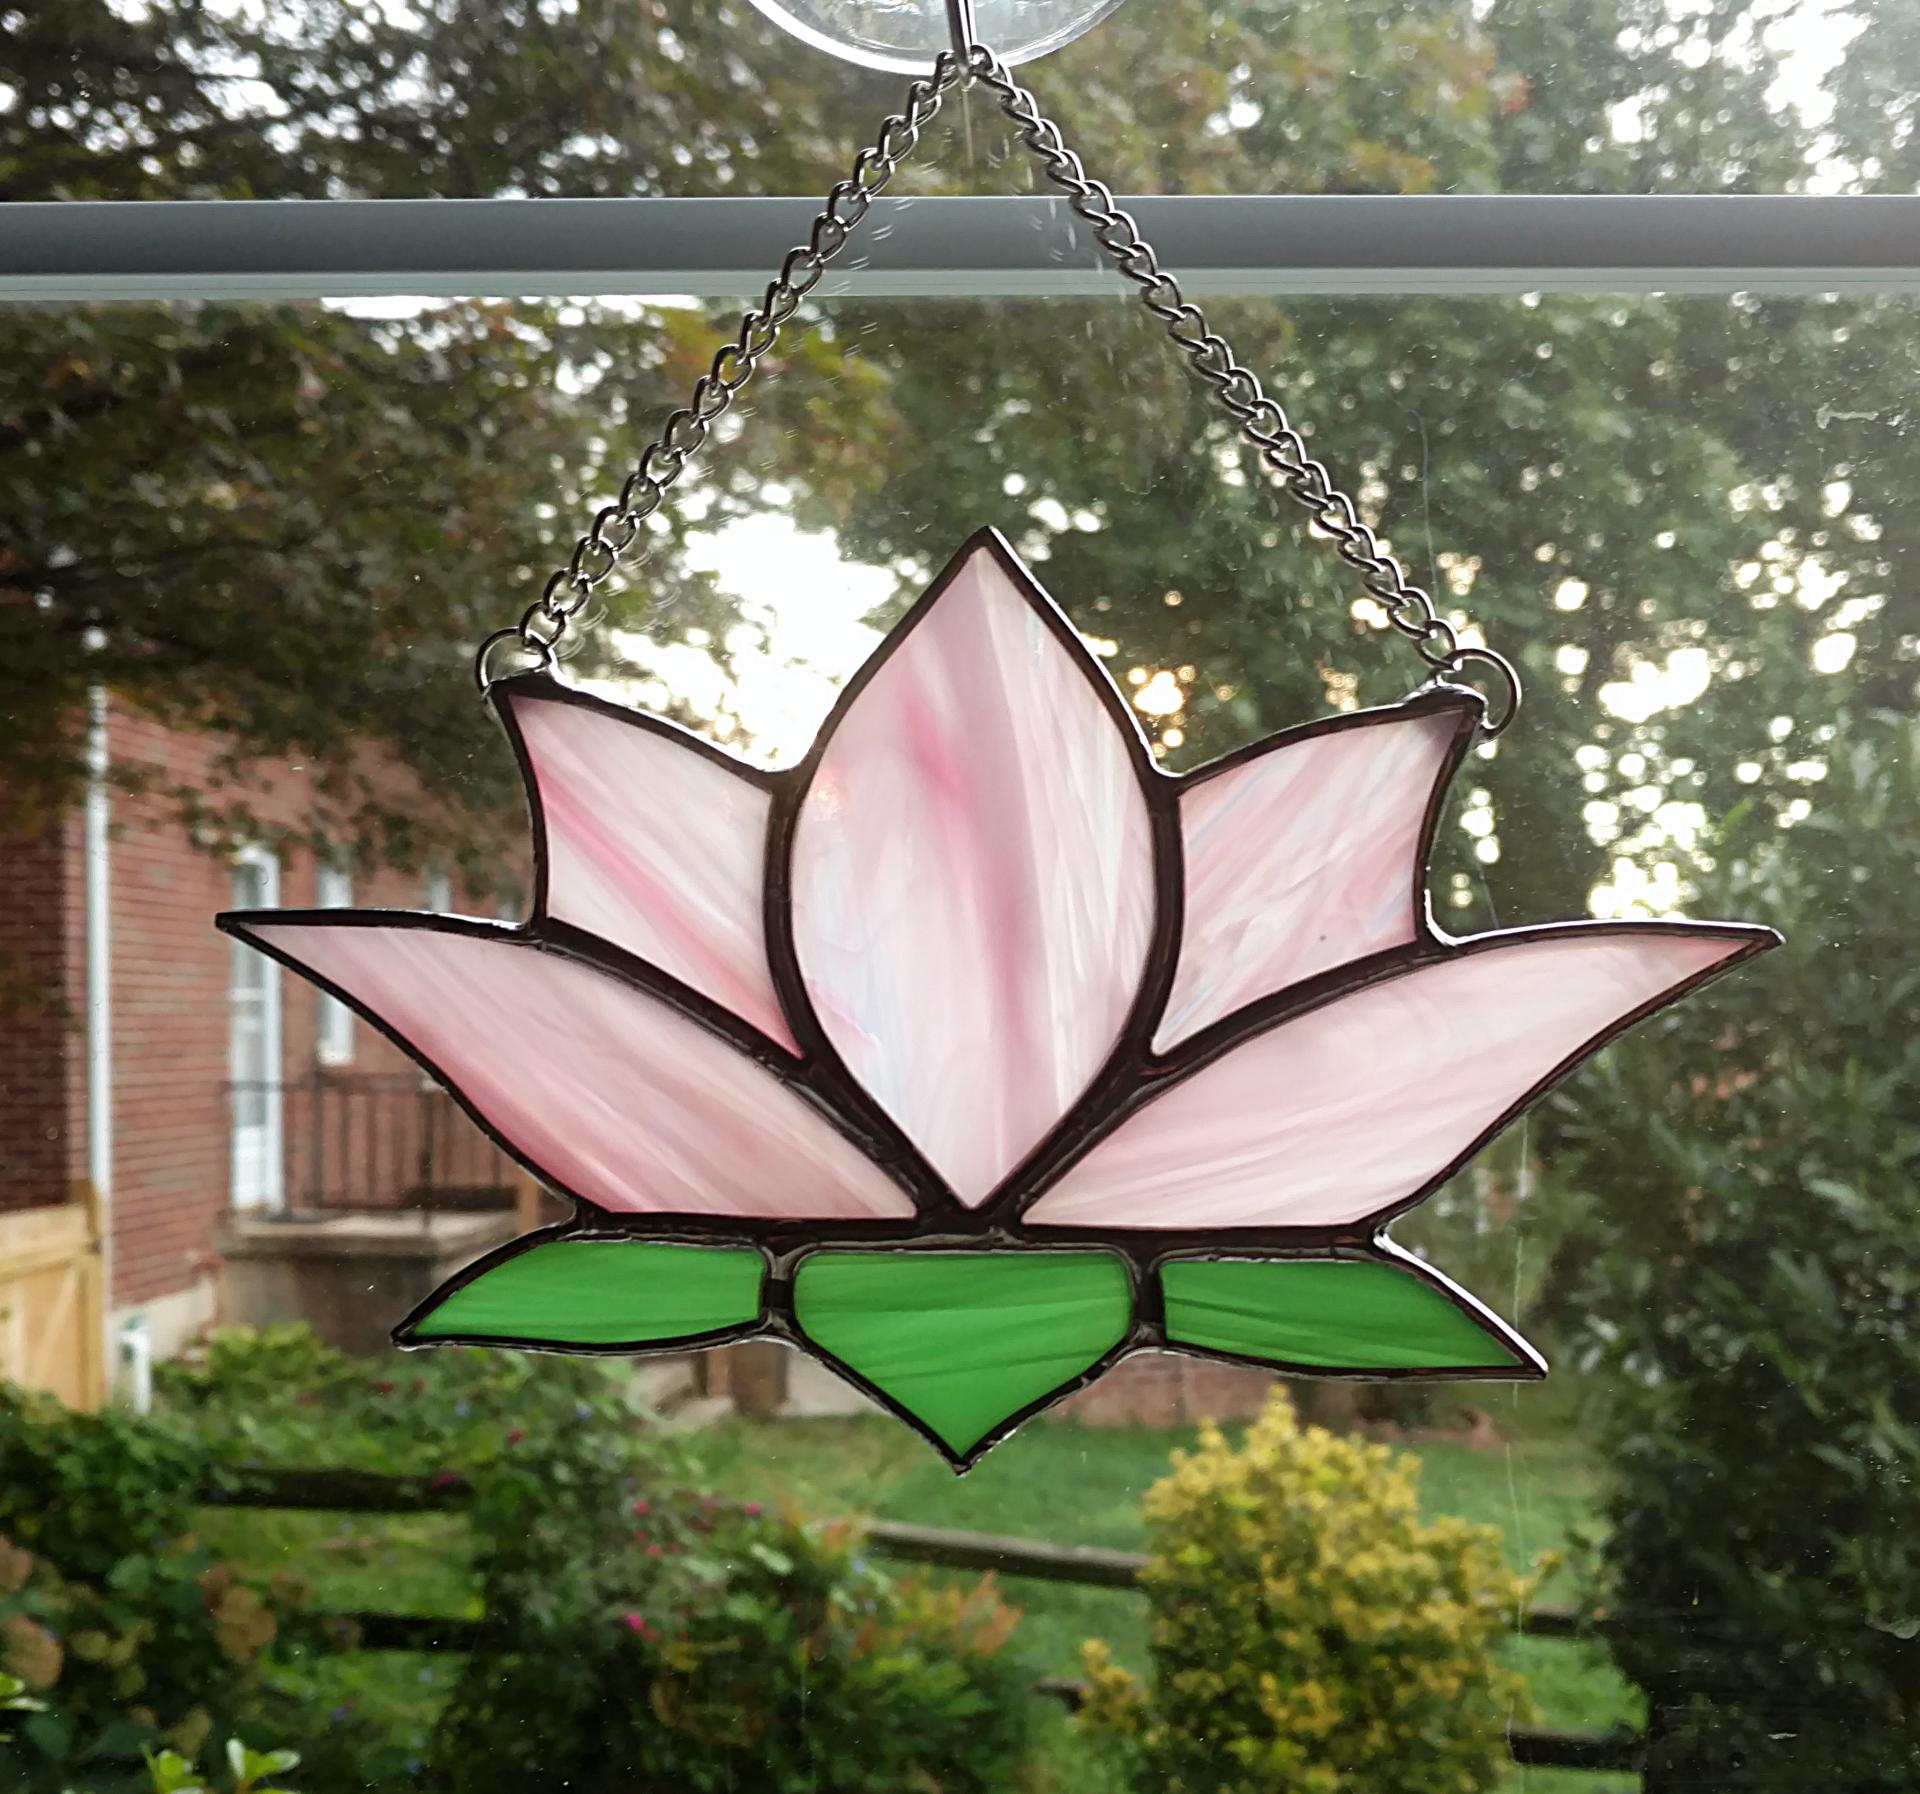 Stained Glass Flower